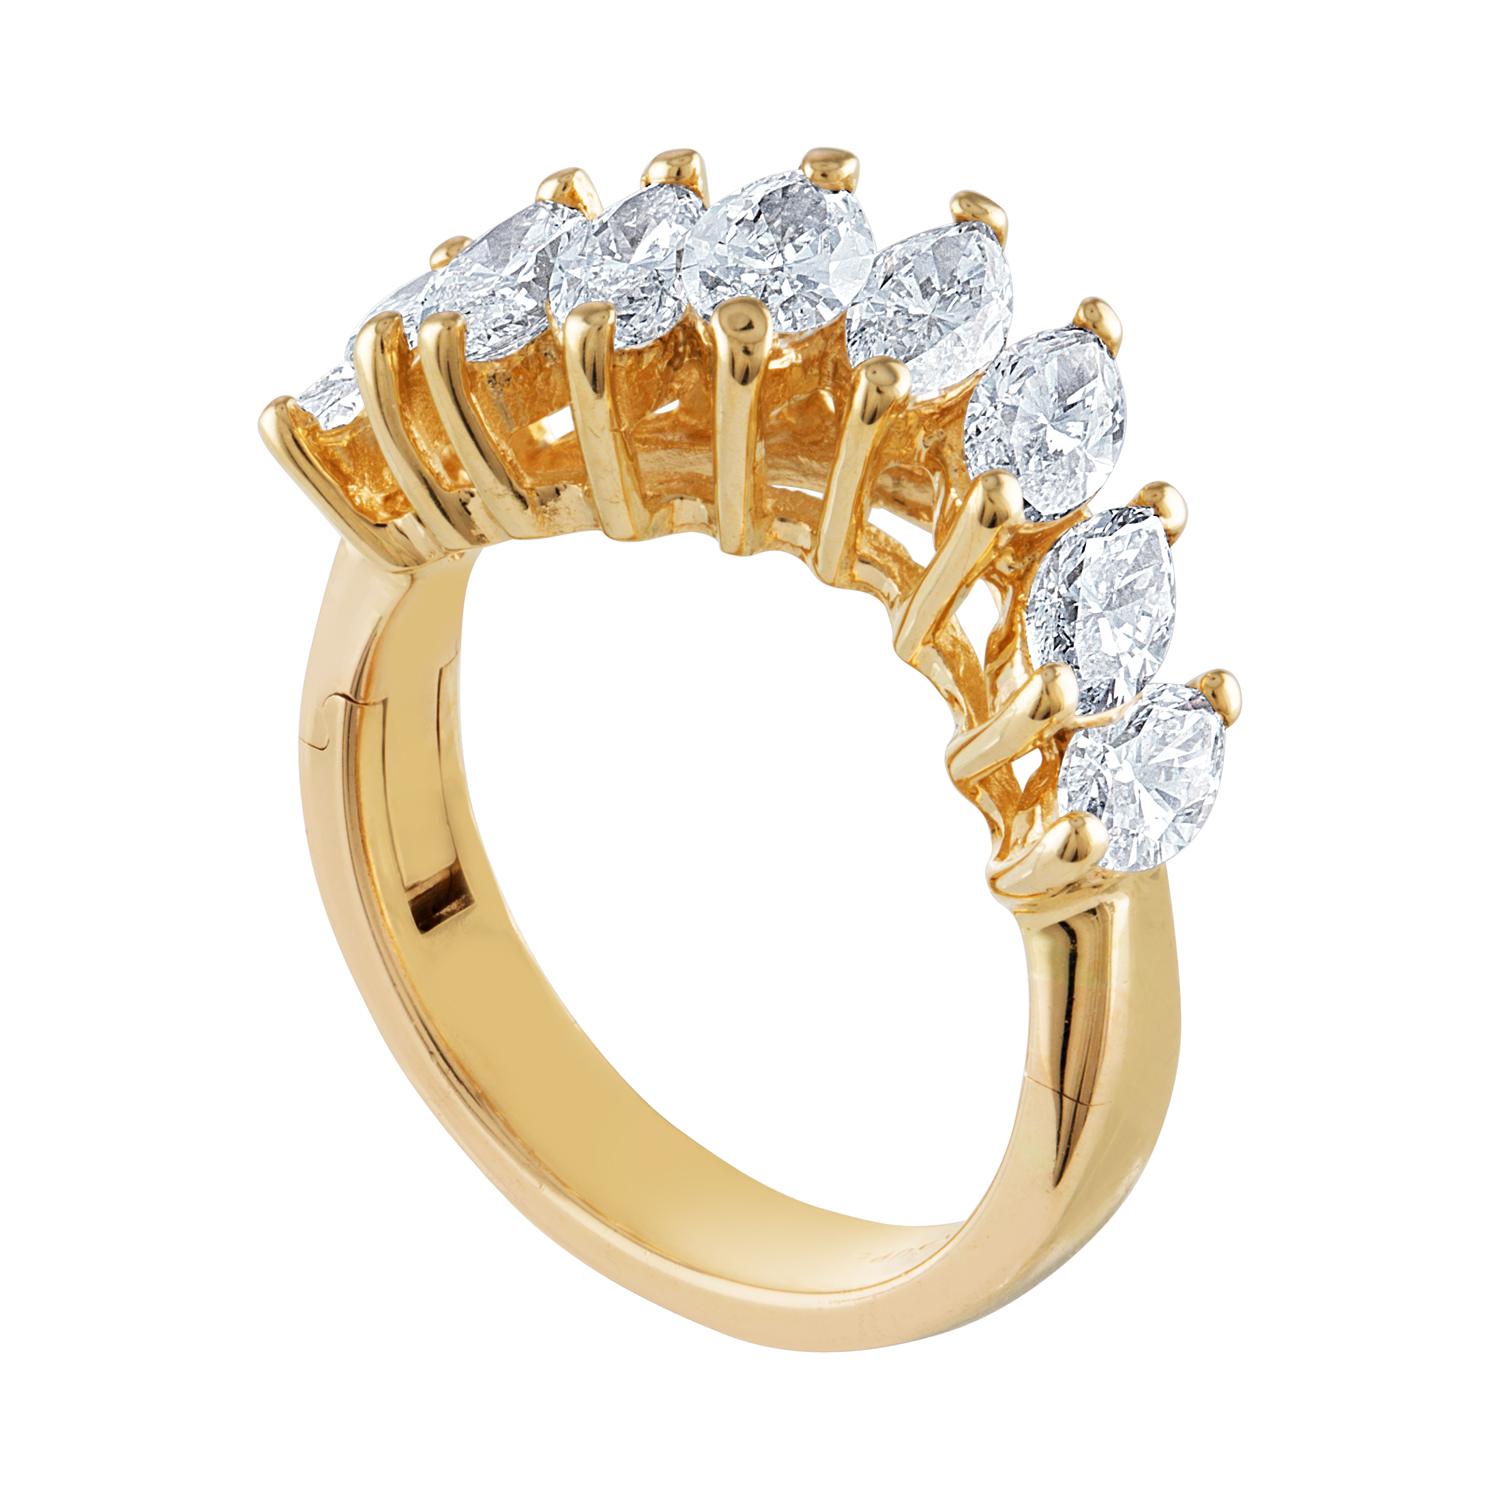 Nine-Stone Wave Half Band Ring
The ring is 14K Yellow Gold
There are 2.00 Carats Diamonds F VVS
The ring is a size 6.75, sizable.
This is a Superfit® shank
The side unhinges so you can slip the ring on.
Wonderful solution for anyone who has